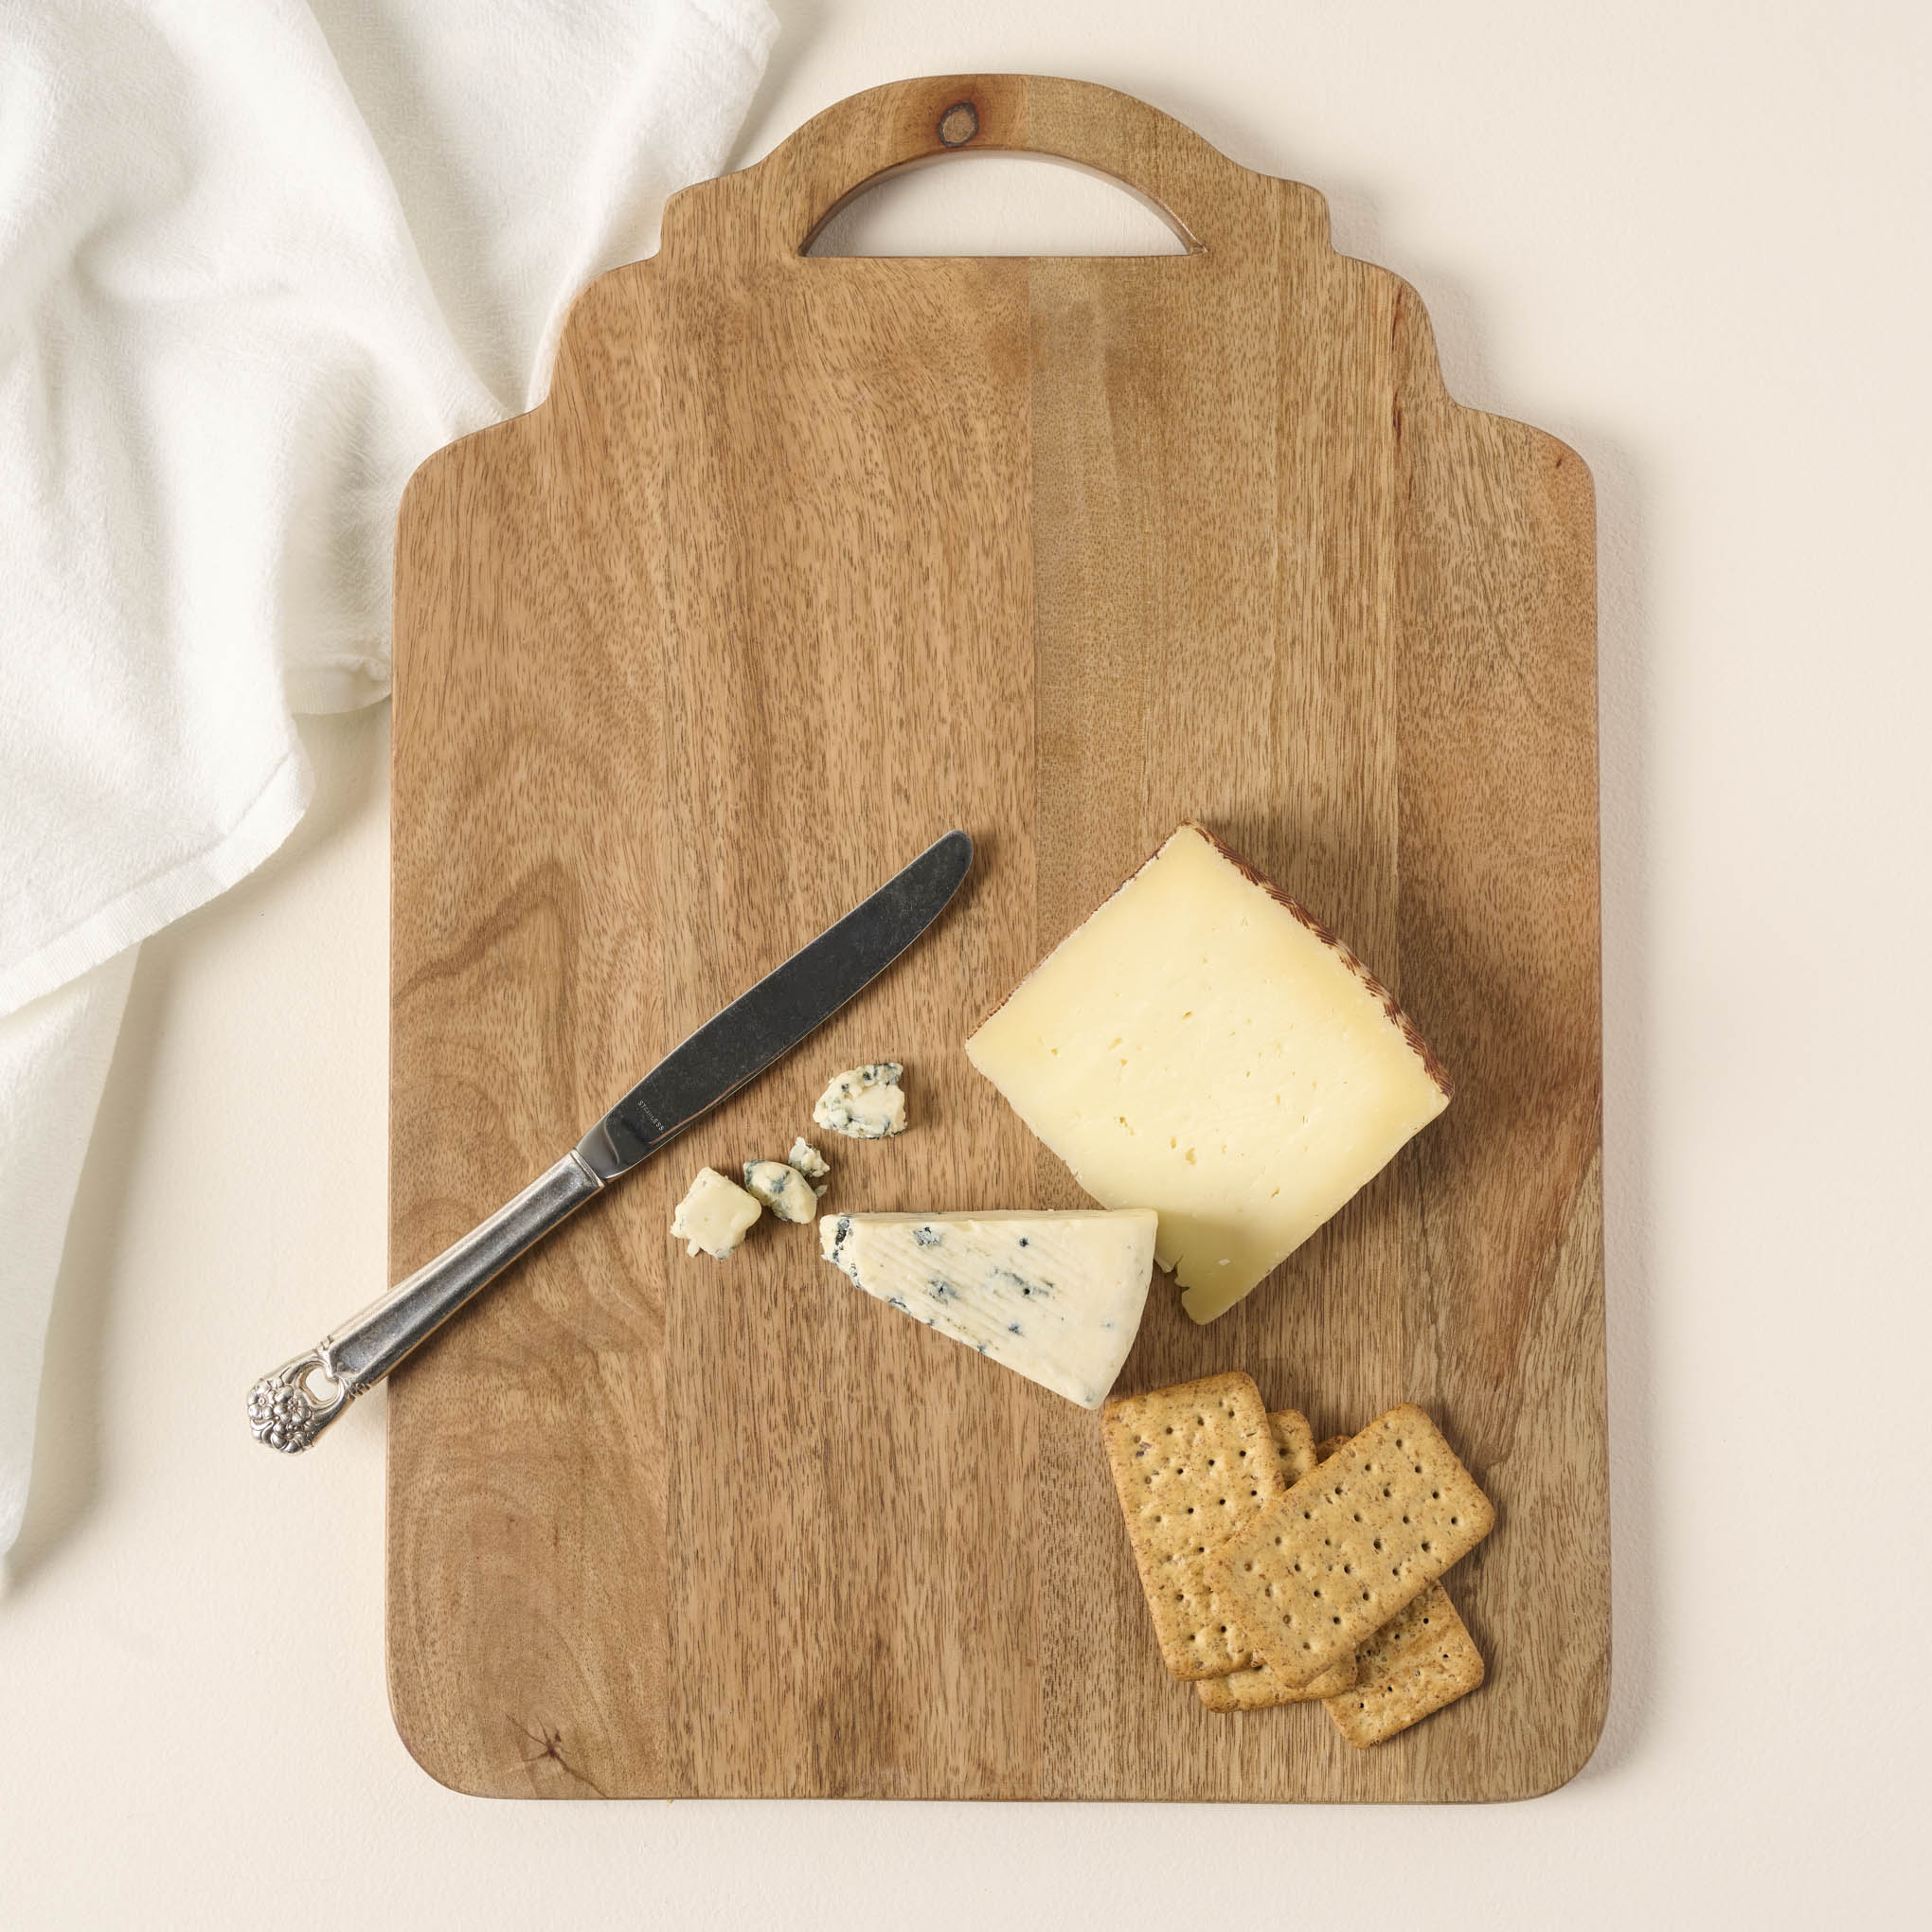 Ells Wooden Serving Board with cheese, crackers, and a butter knife on it $38.00